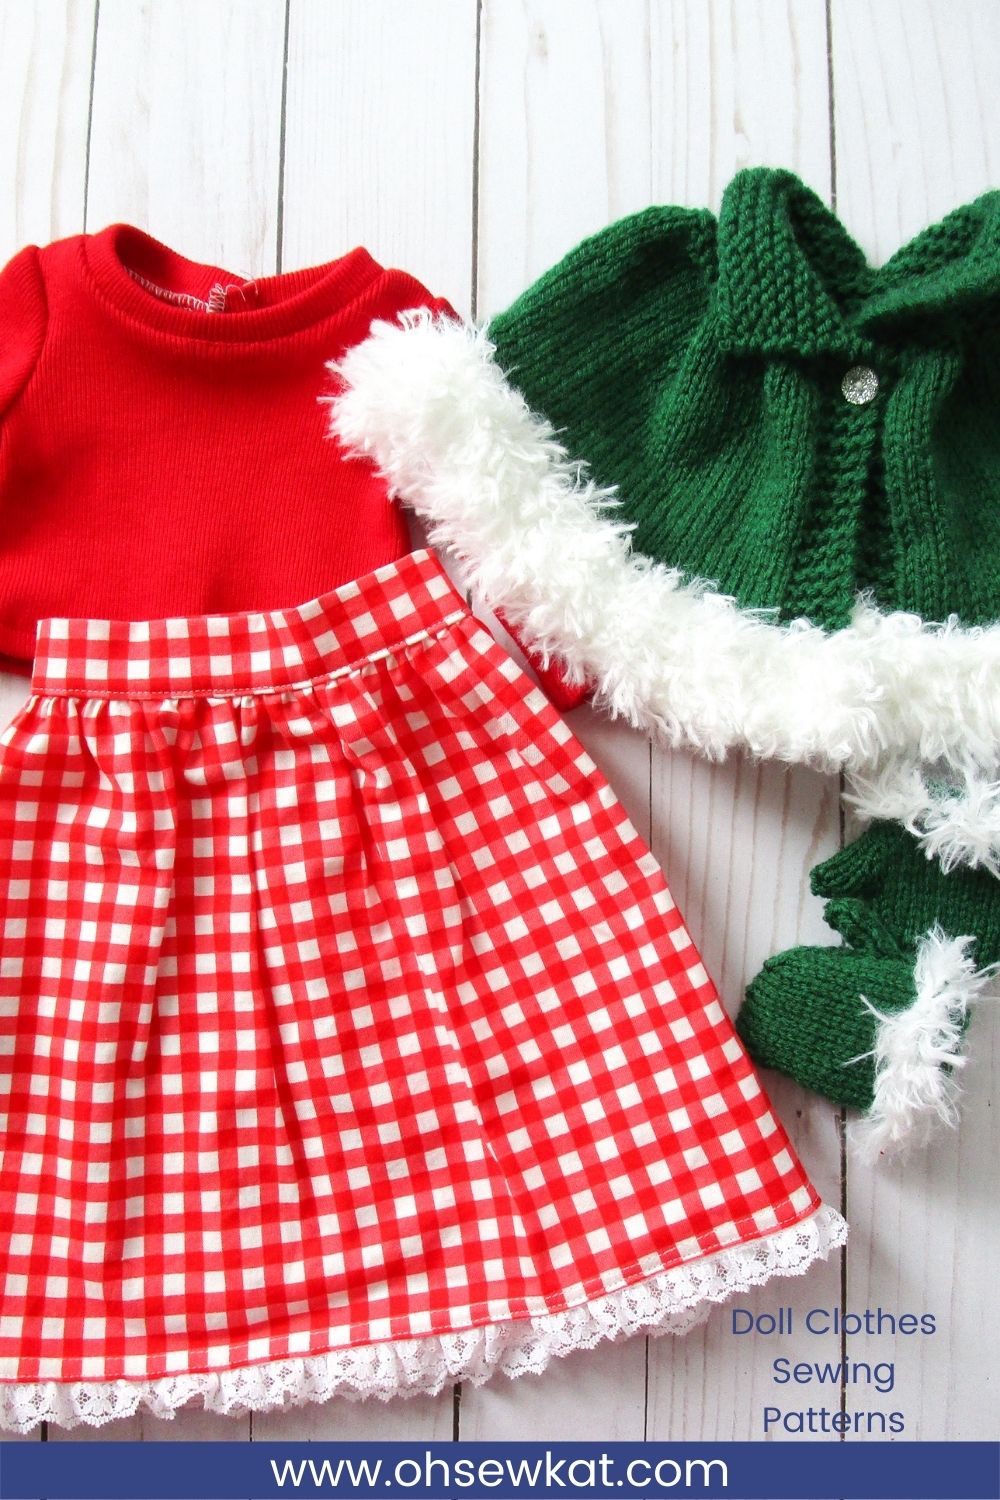 Doll clothes laying flat: red Jumping Jack turtleneck, red gingham skirt, and knitted green cape and mittens with white fur trim